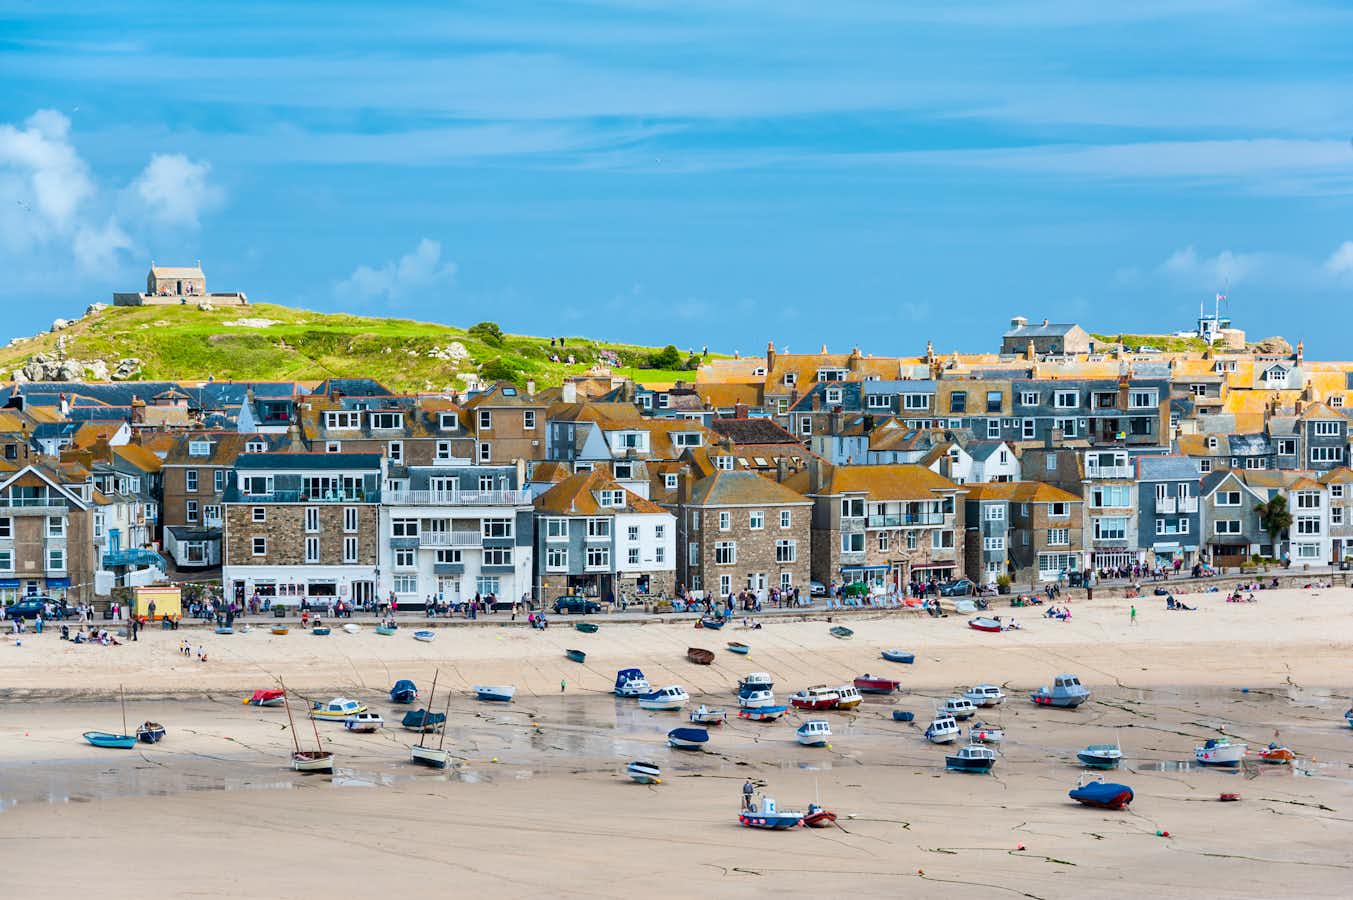 tourhub | Shearings | New Year in St Ives 